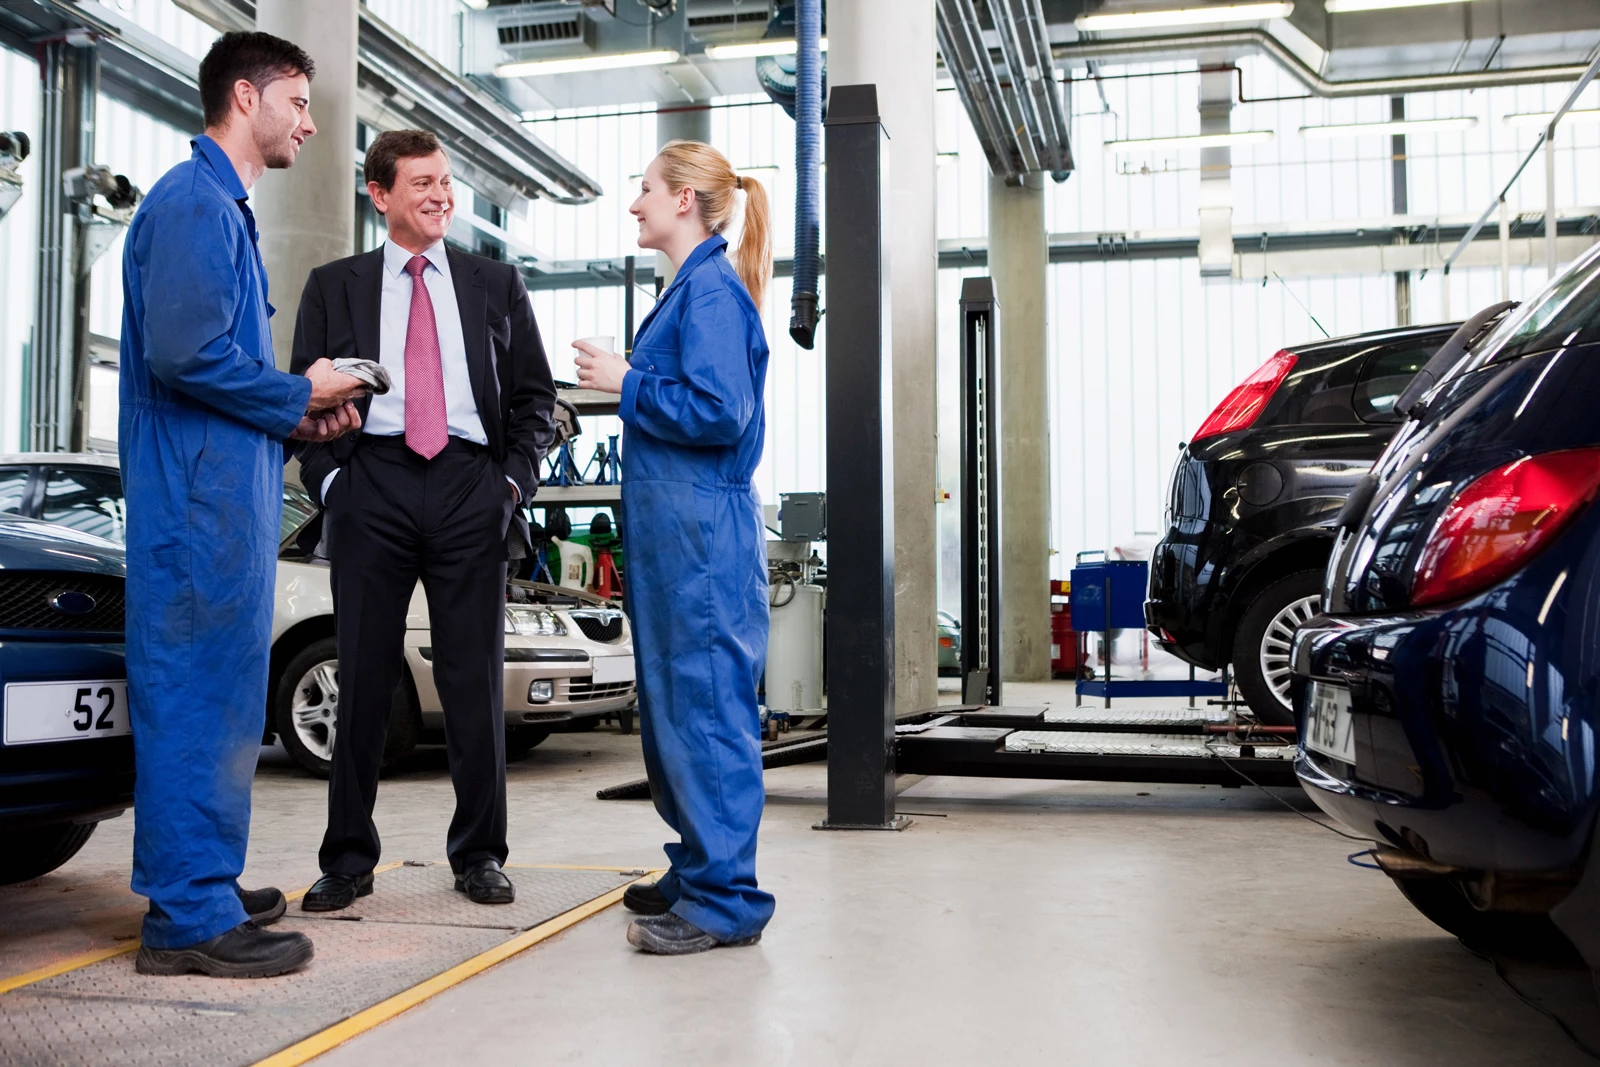 The owner of a car mechanics garage standing with two employees in the workshop